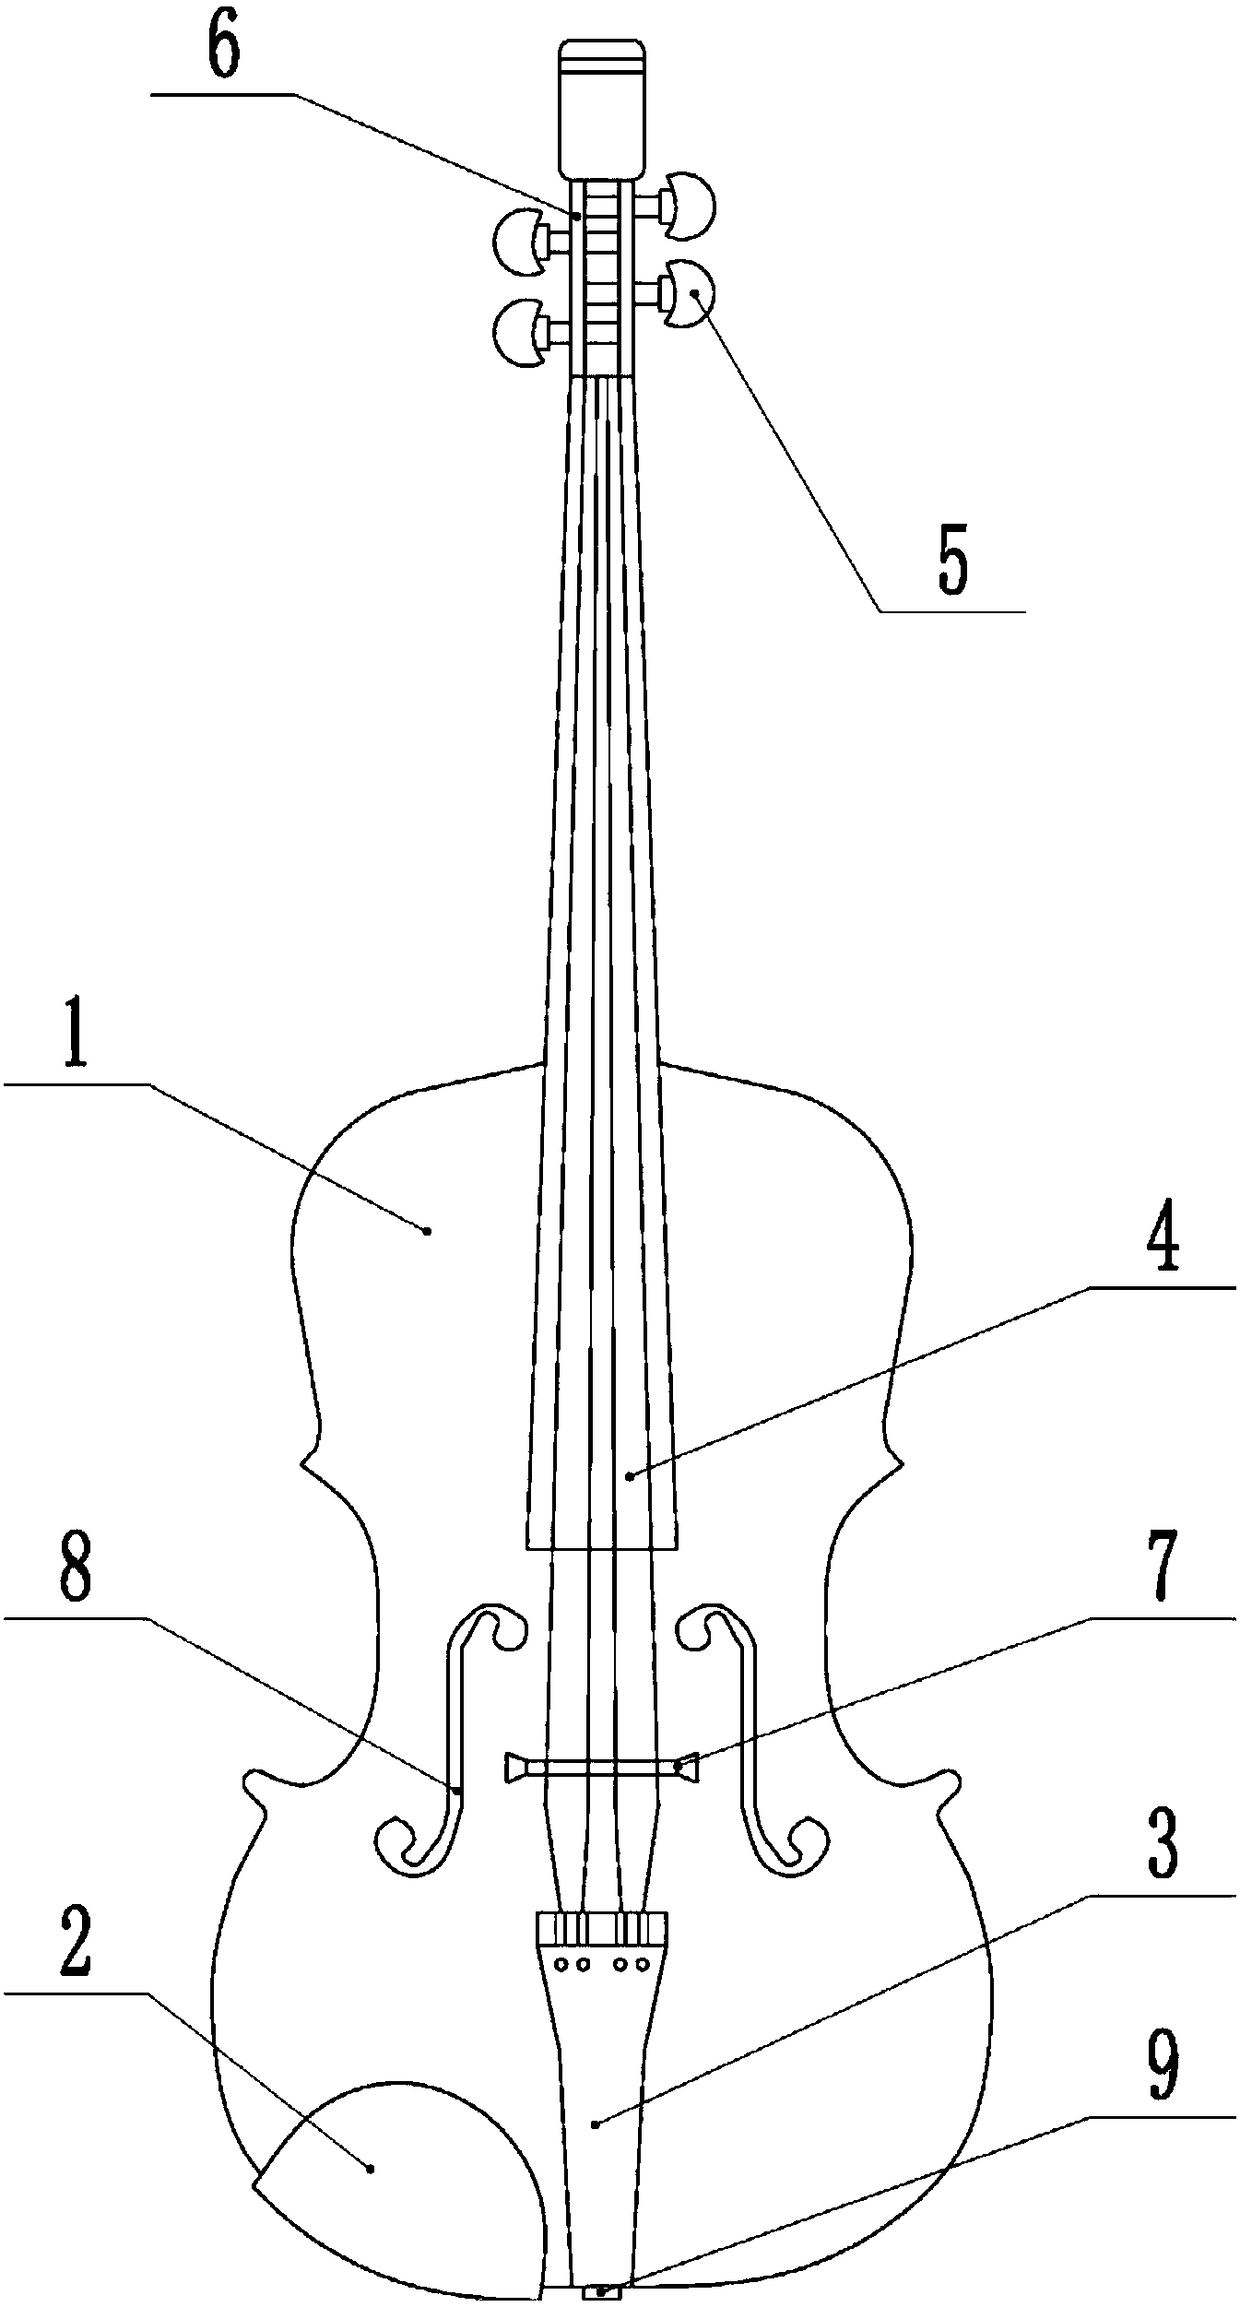 Standard appliance for collective teaching of Huang bell